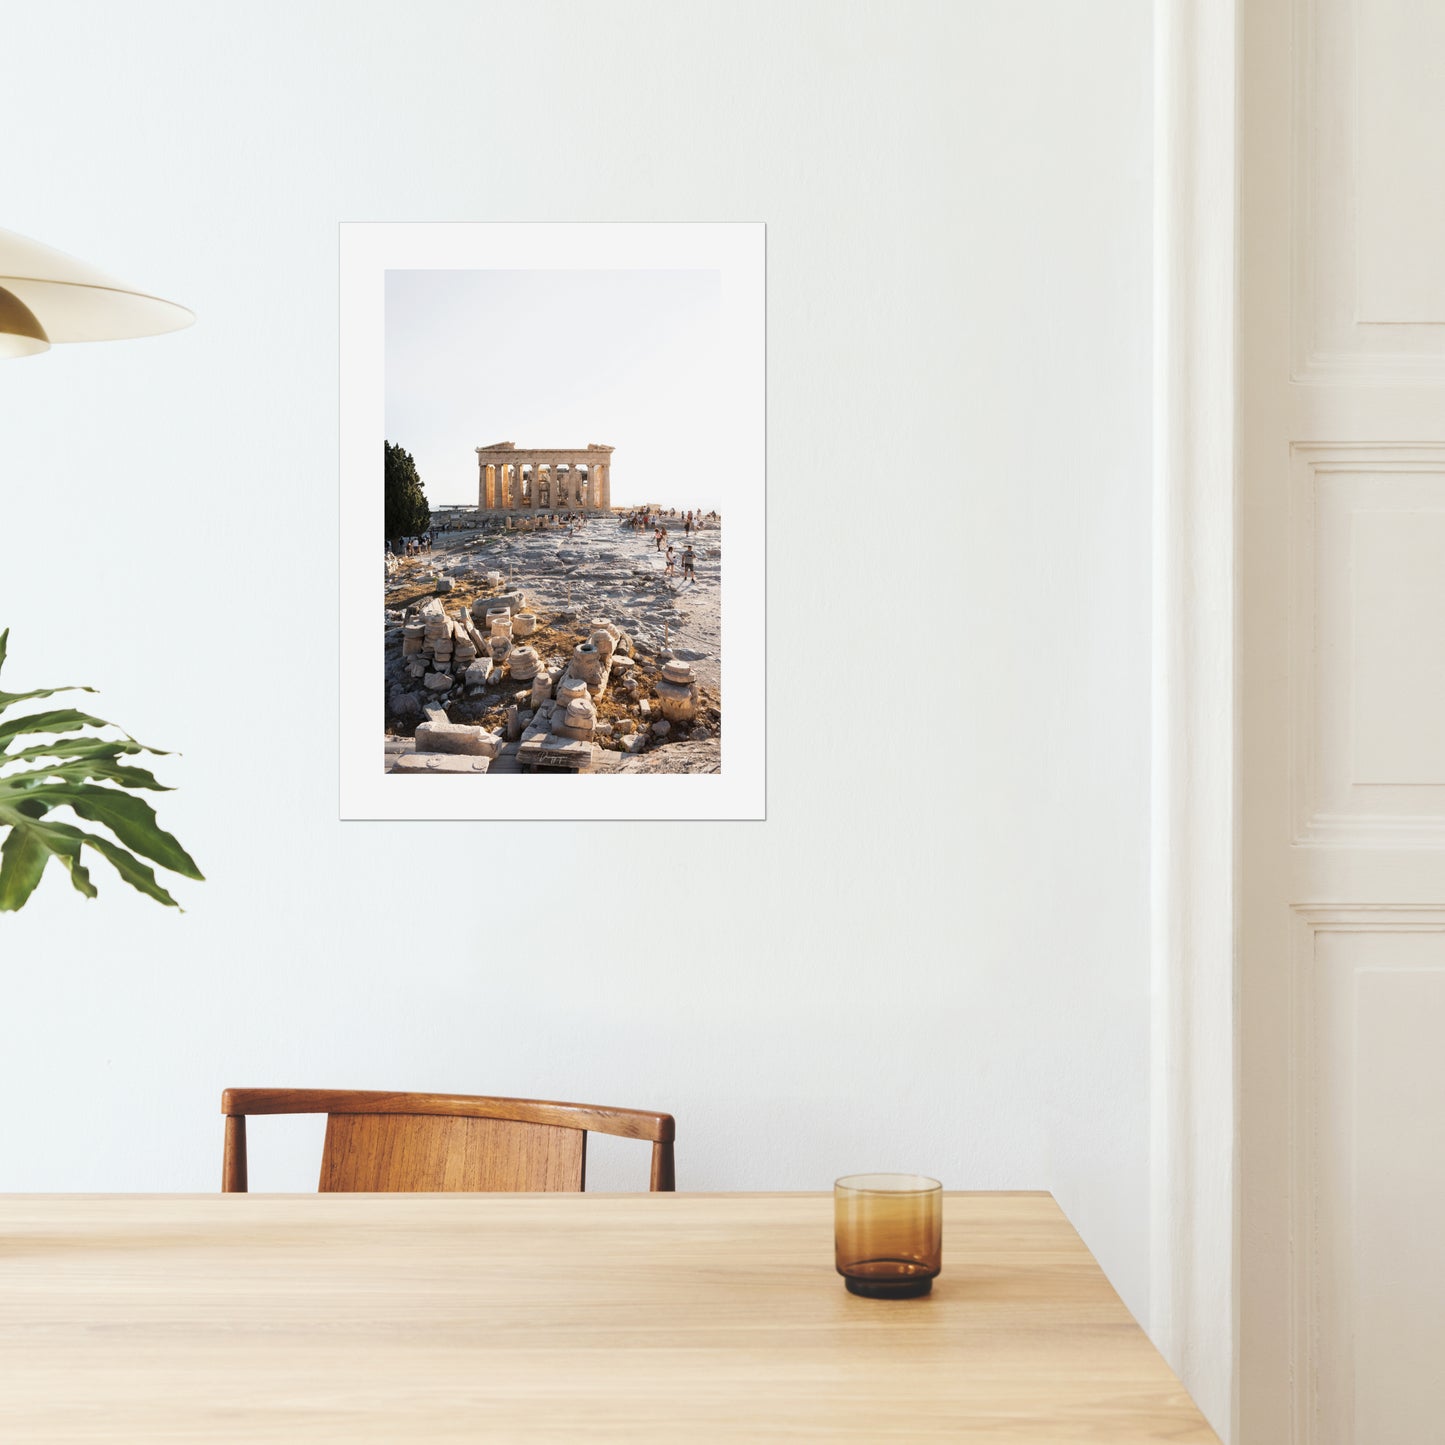 A mockup of a big poster on the wall of a dining room showing the Parthenon on the hill of Acropolis in Athens Greece during a bright warm day